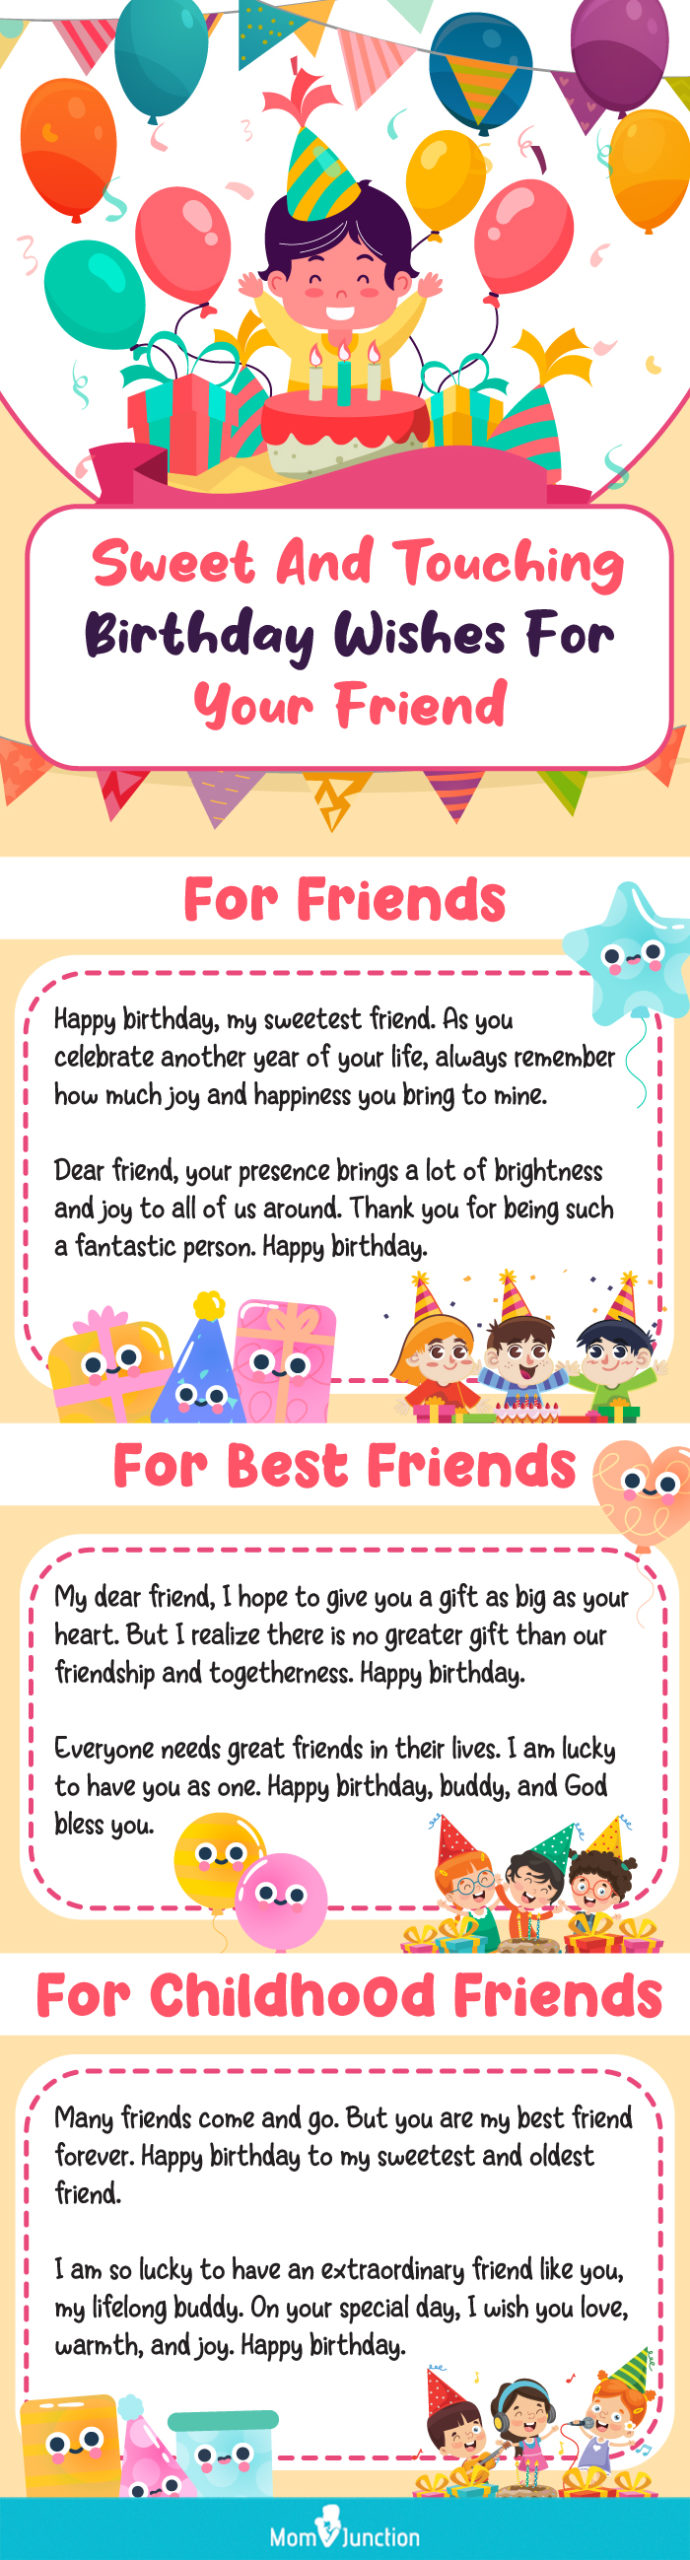 images of birthday wishes for friend